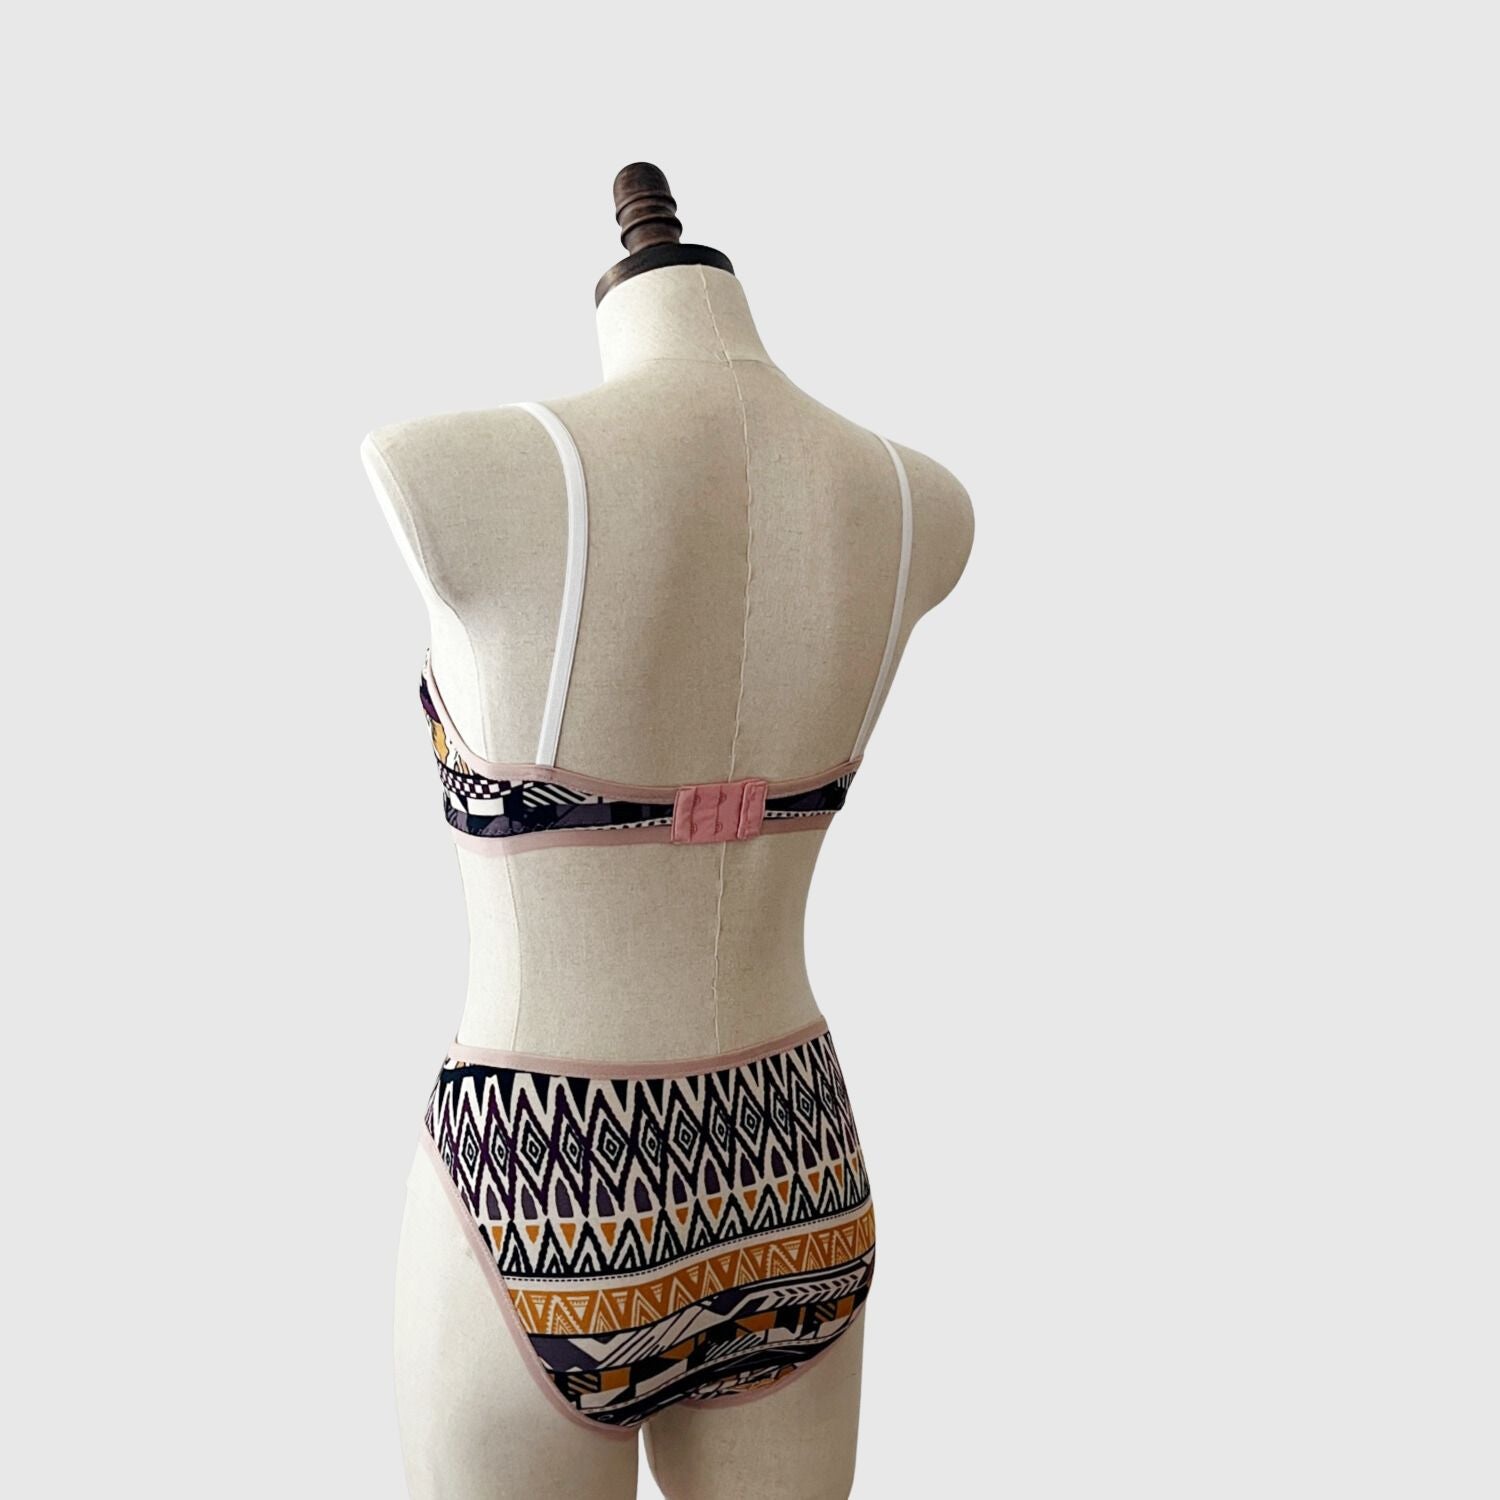 Handmade Triangle bra panties set made in Canada | Shop Canadian made lingerie 